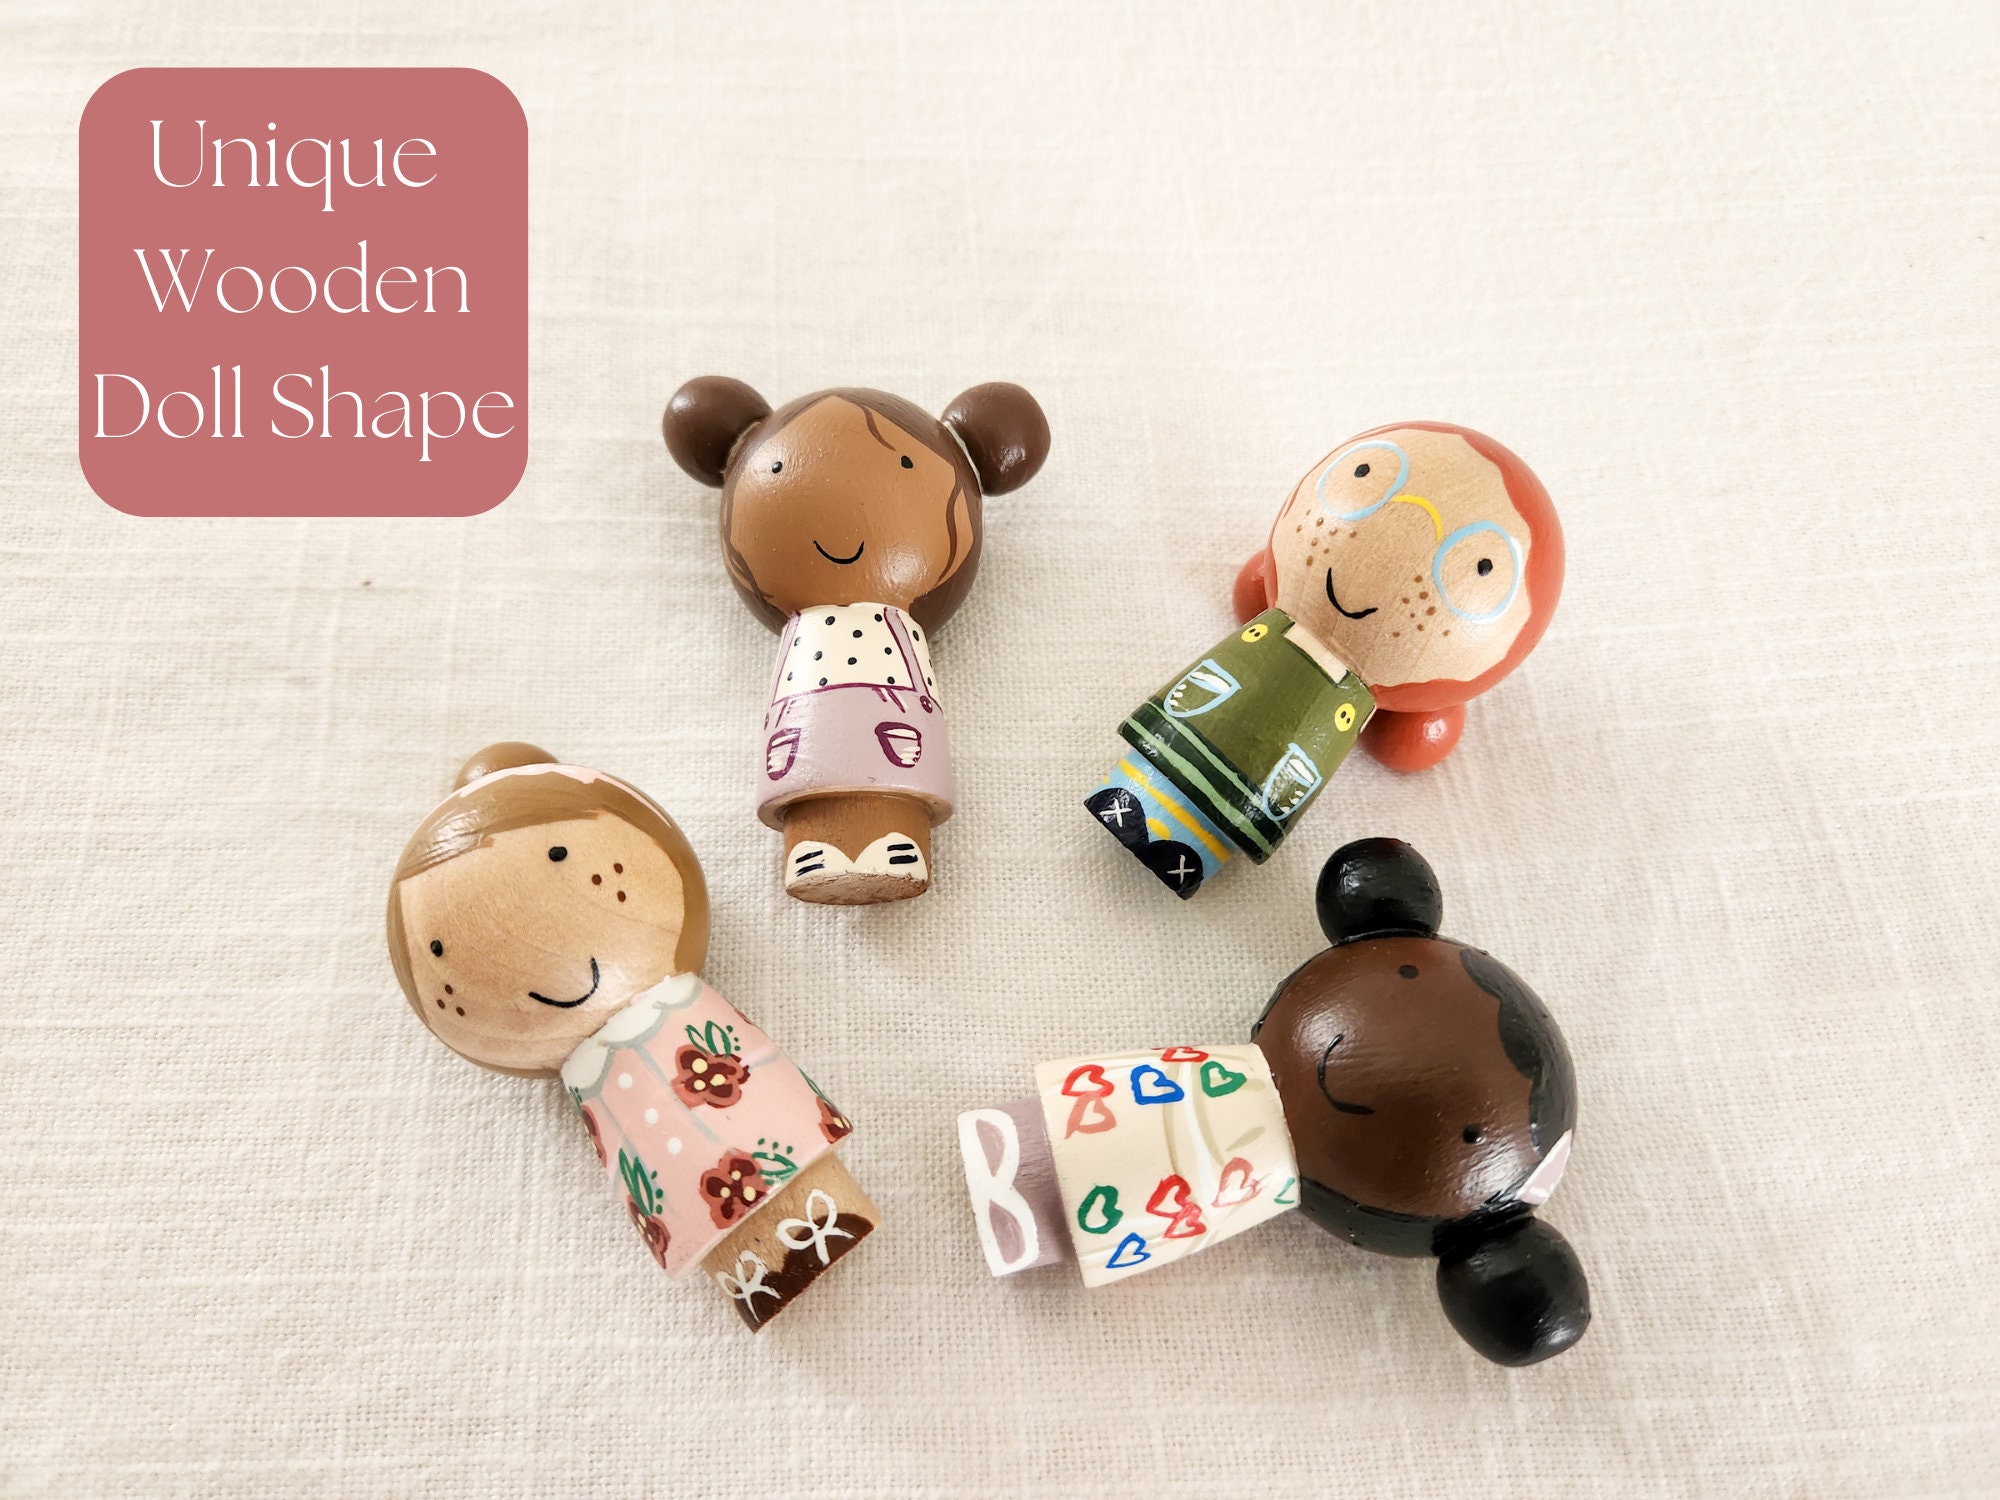 Wooden Peg Dolls DIY Inspired by Little House on the Prairie